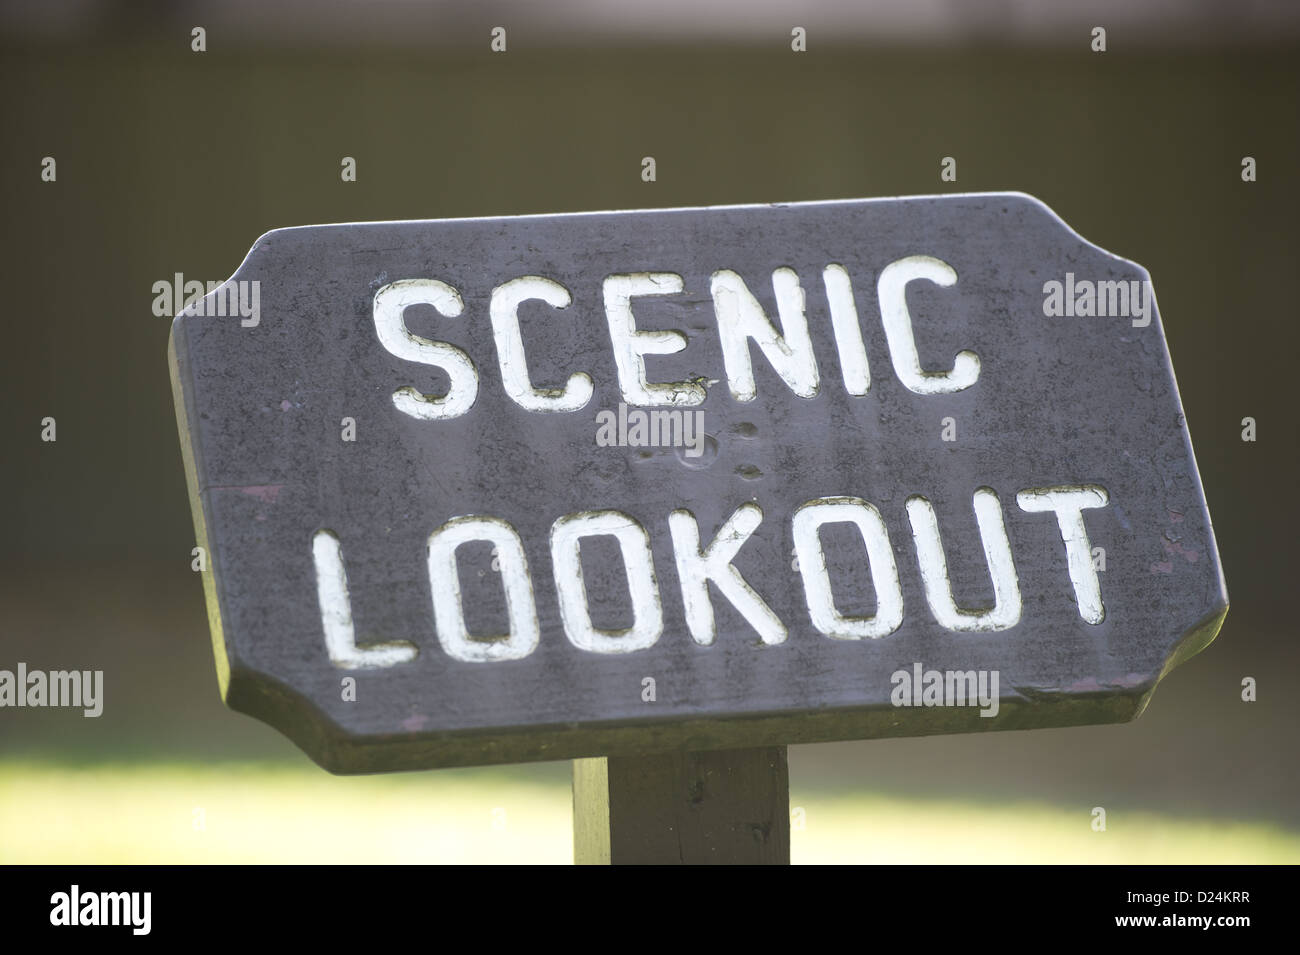 Sign for a scenic lookout near the Mason Dixon Line Stock Photo